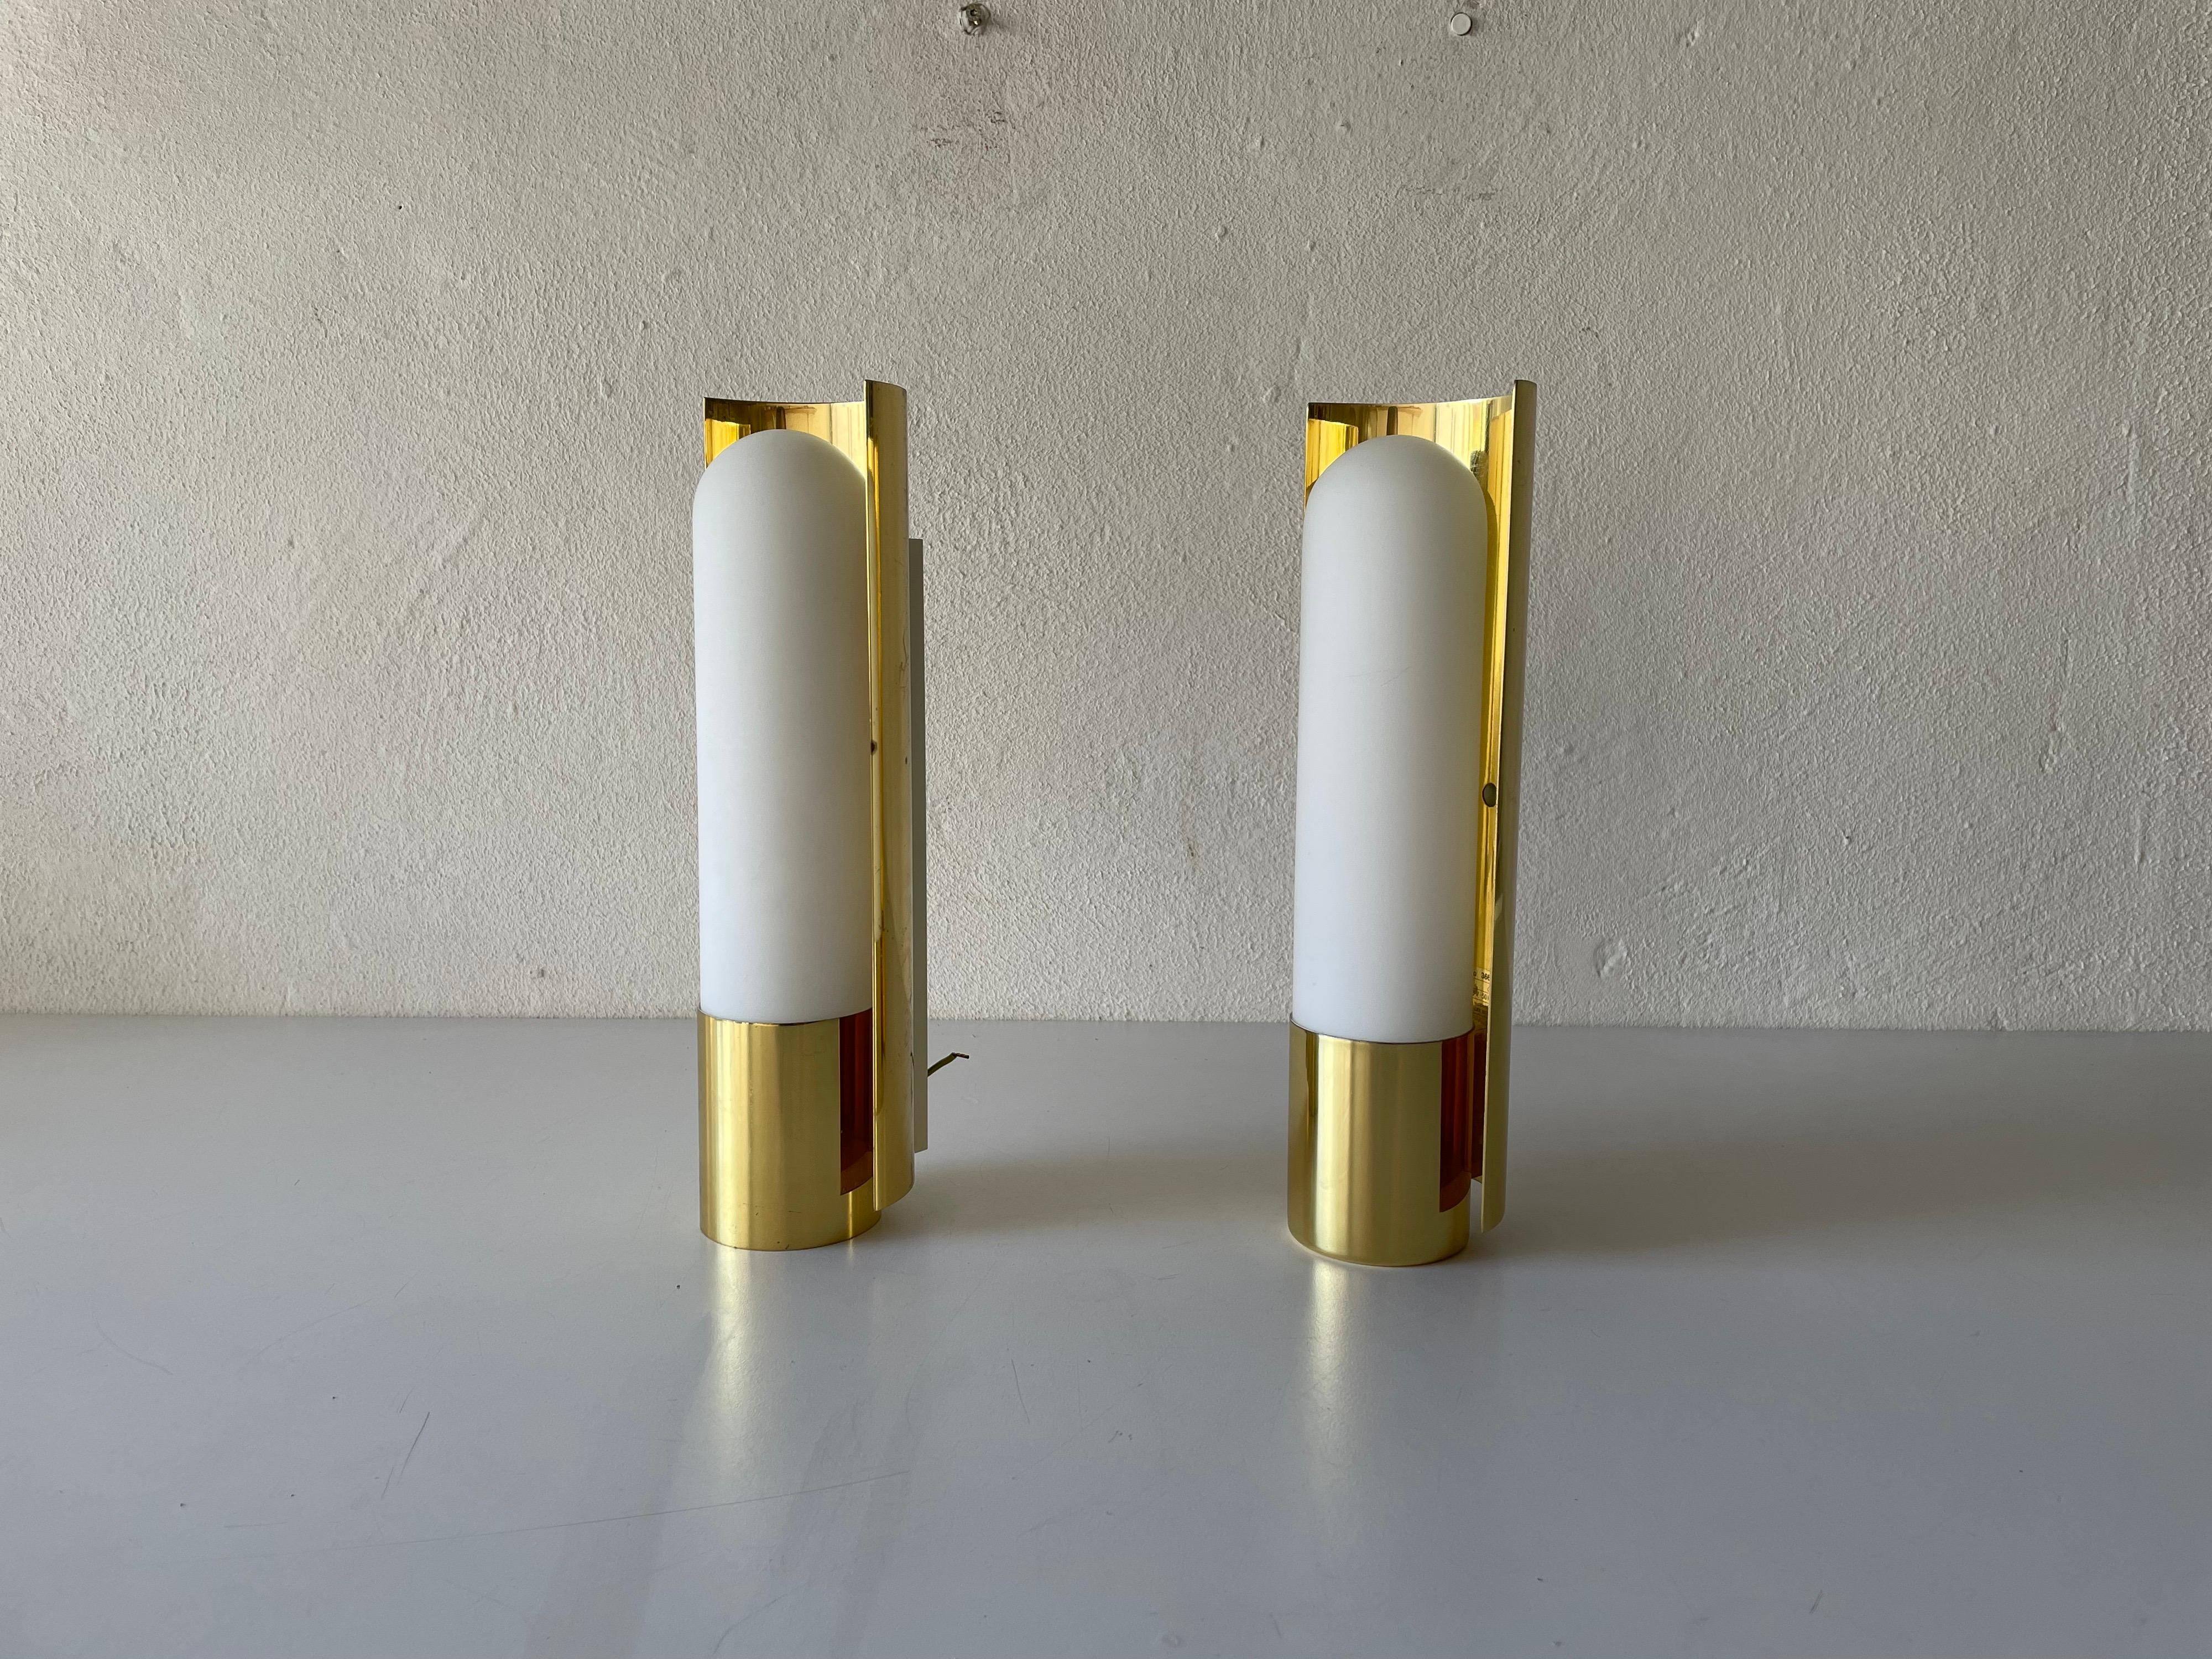 Opal Glass & Brass Pair of Sconces by Limburg, 1970s, Germany
Rare wall lights
Hollywood regency

Very elegant and Minimalist sconces

Lamps are in very good condition.

These lamps works with 11W Osram bulbs. 
Wired and suitable to use in